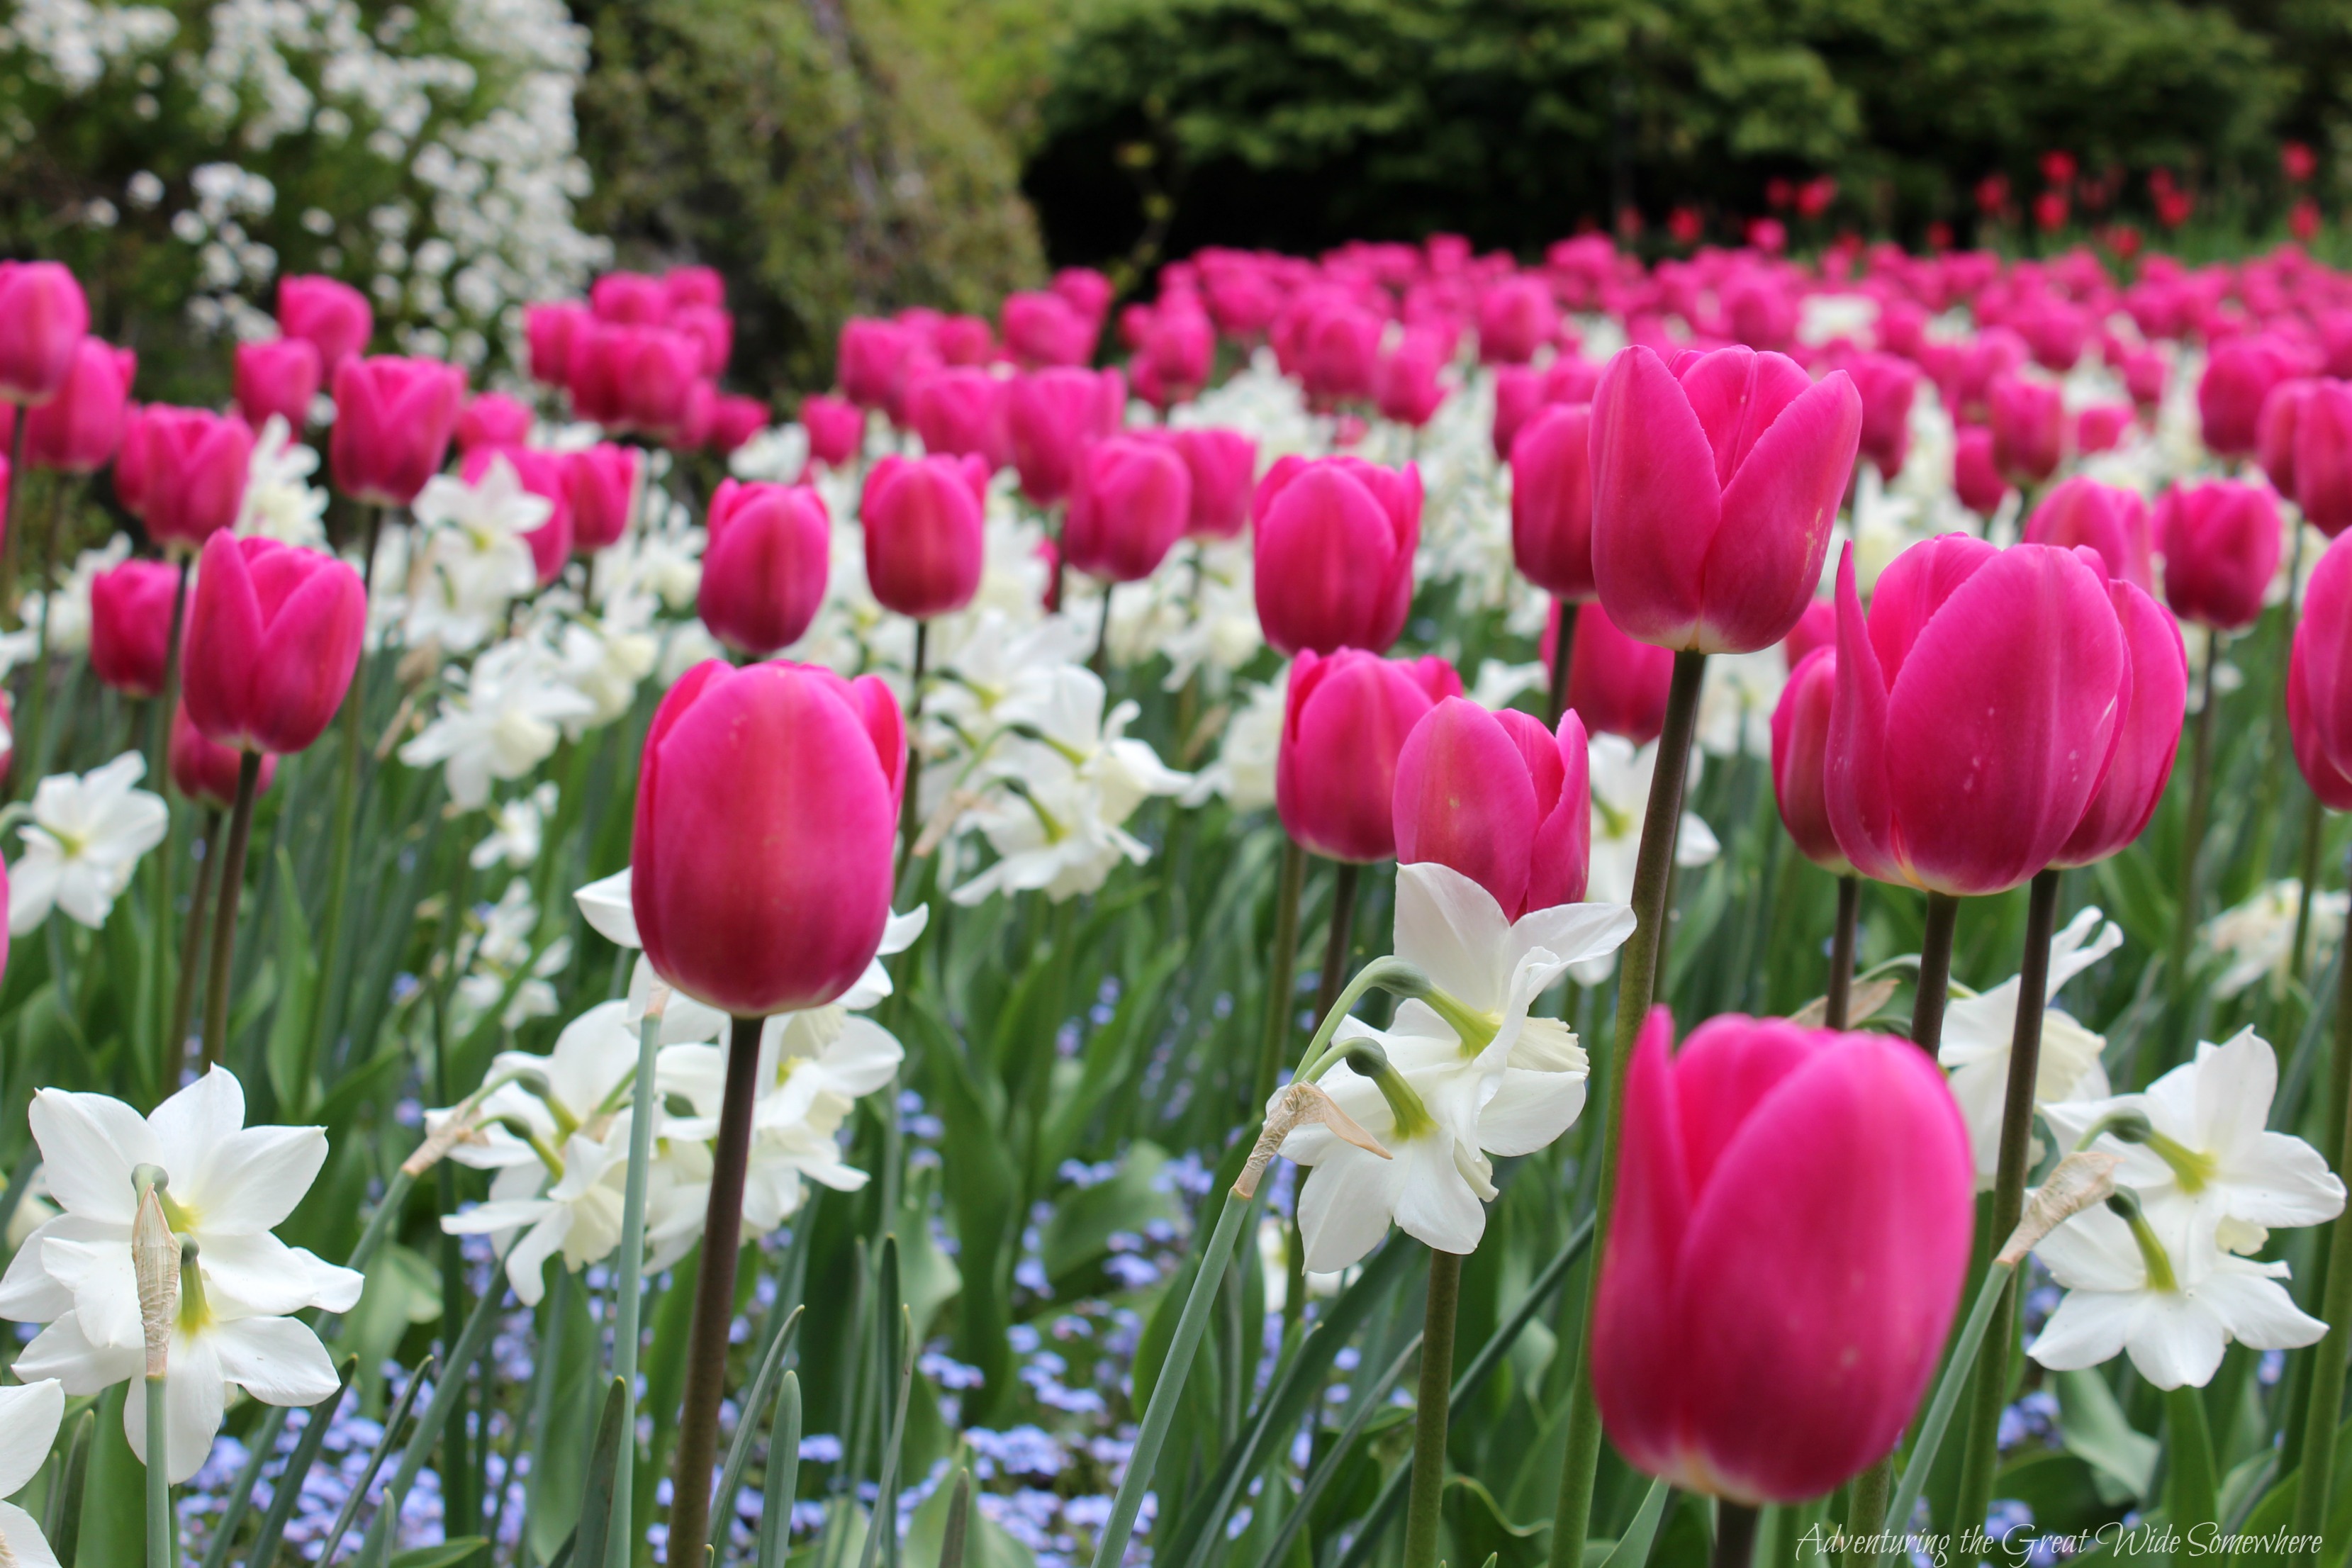 Hot Pink Tulips in Spring Bloom at the Butchart Gardens